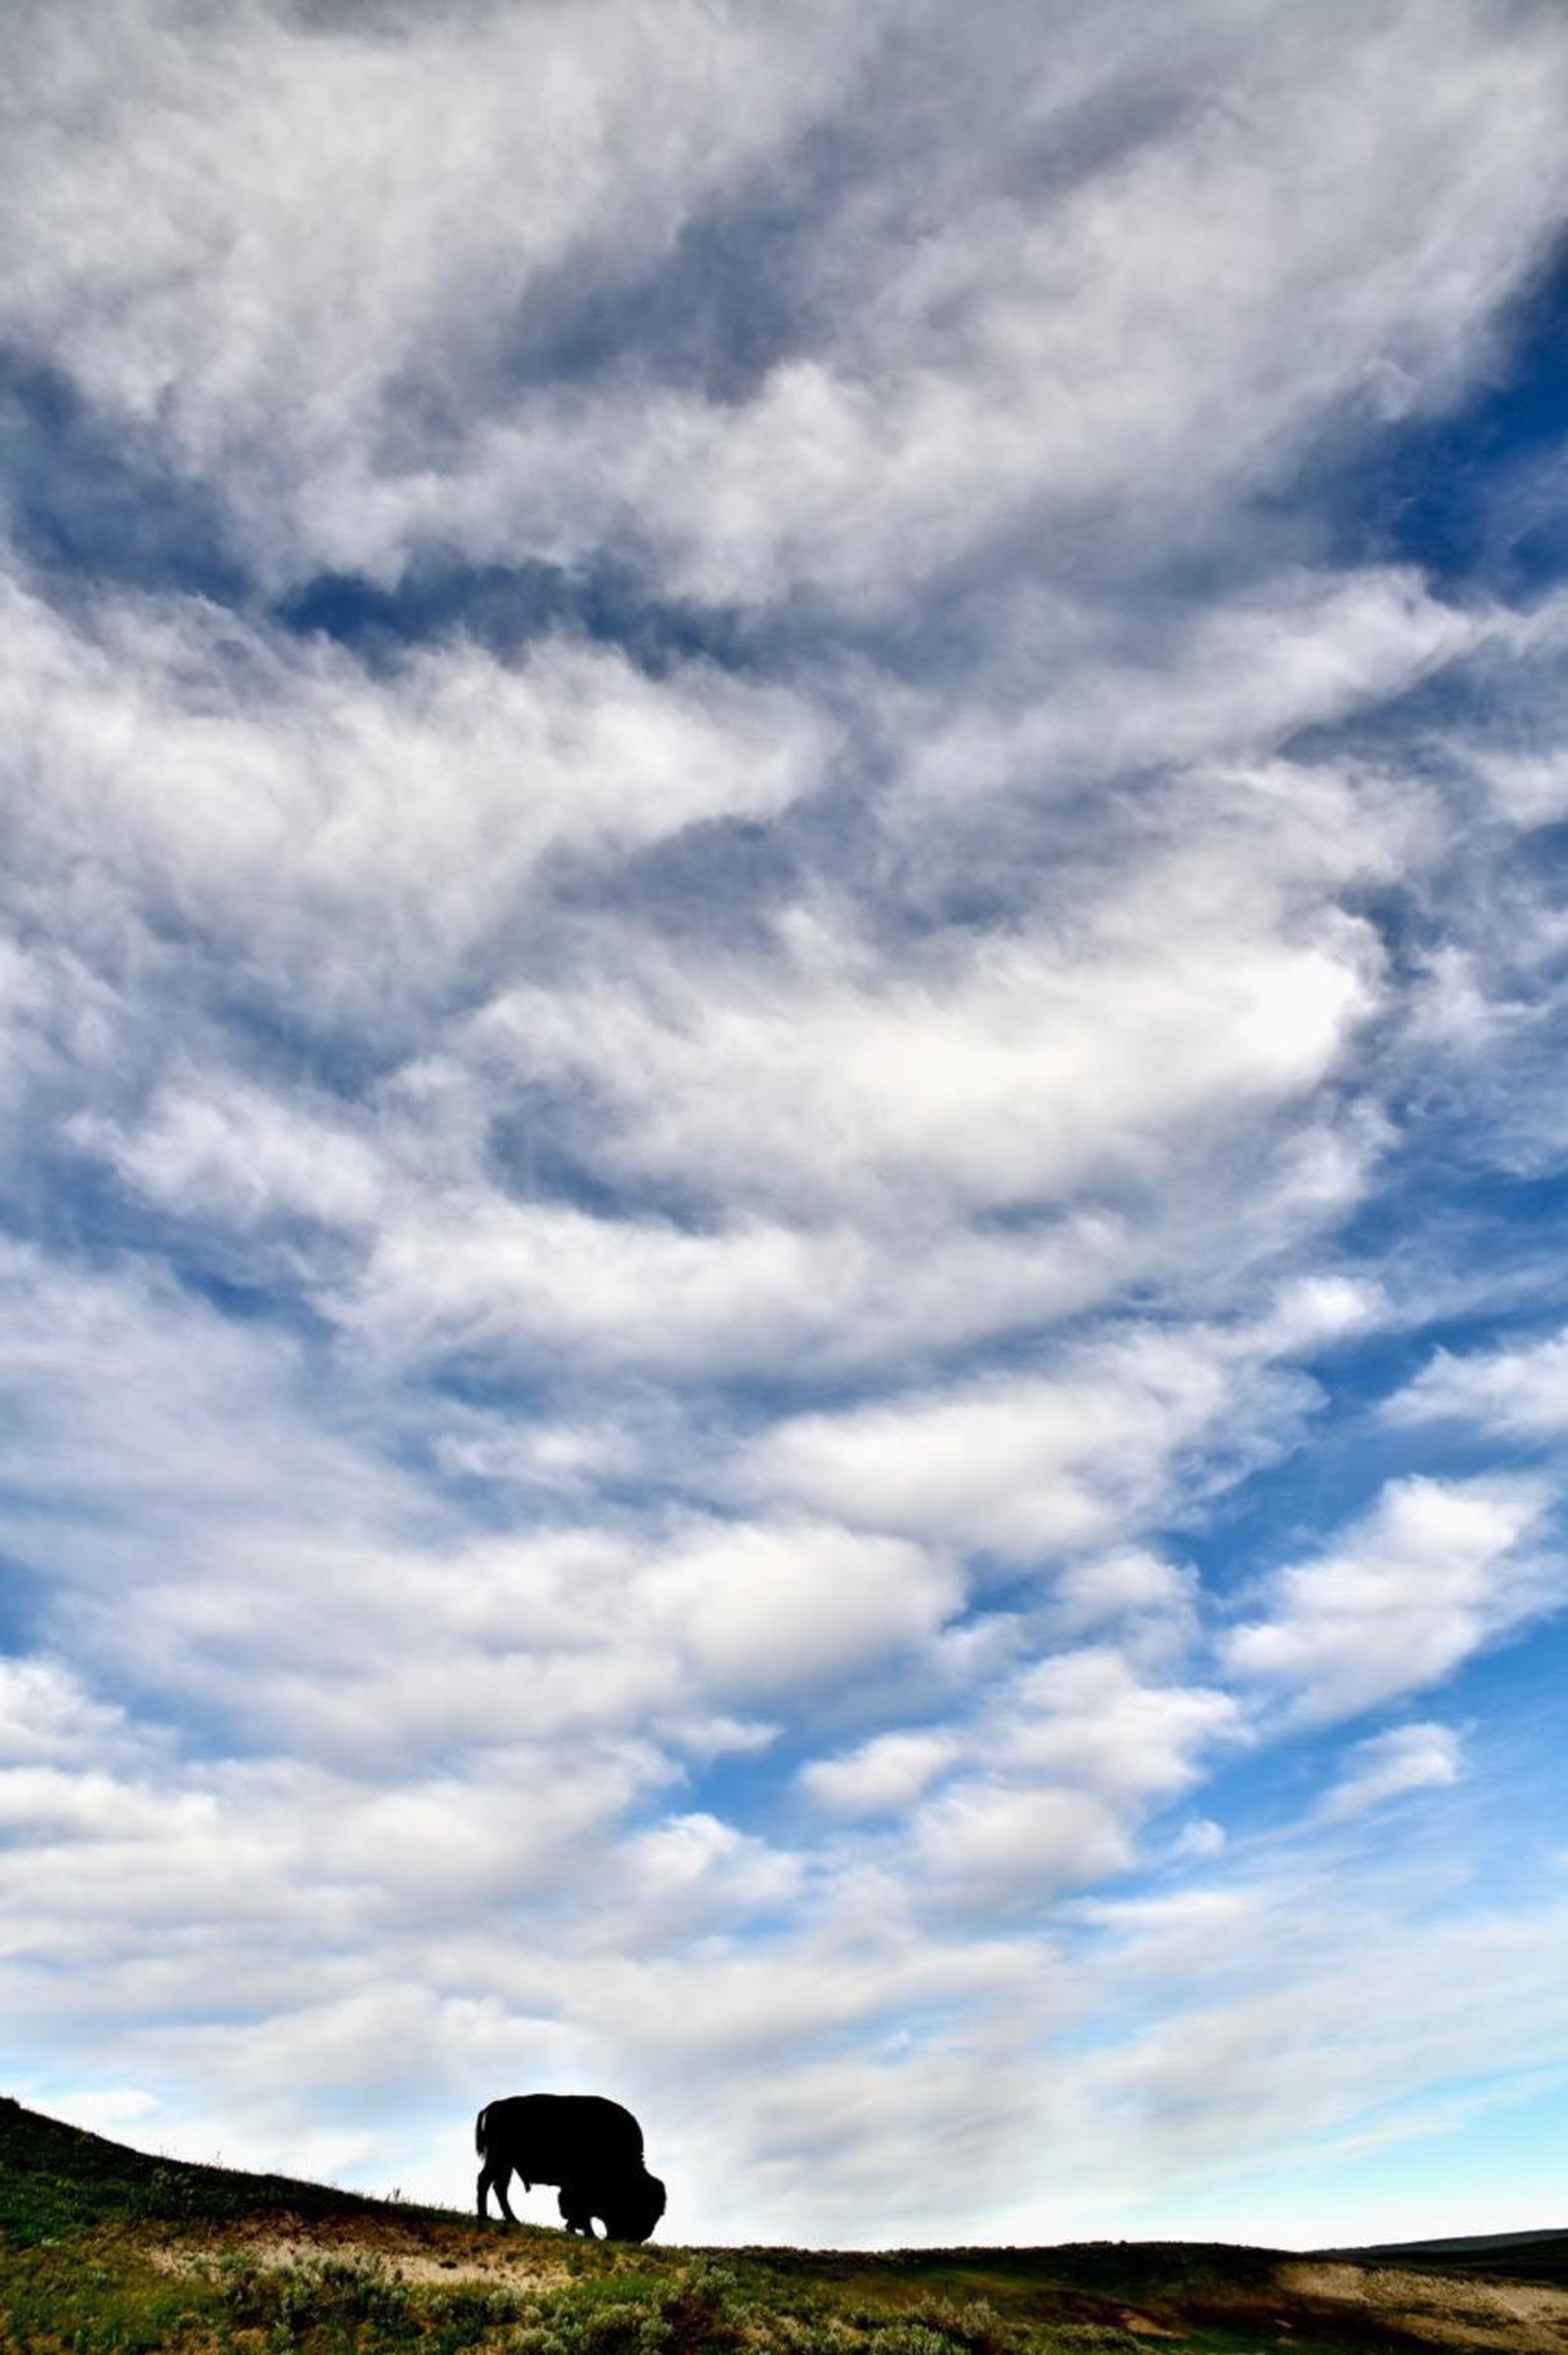 The panoply of clouds each day is a commentary on the nuances of the day's seasonal weather here on the Yellowstone Plateau.